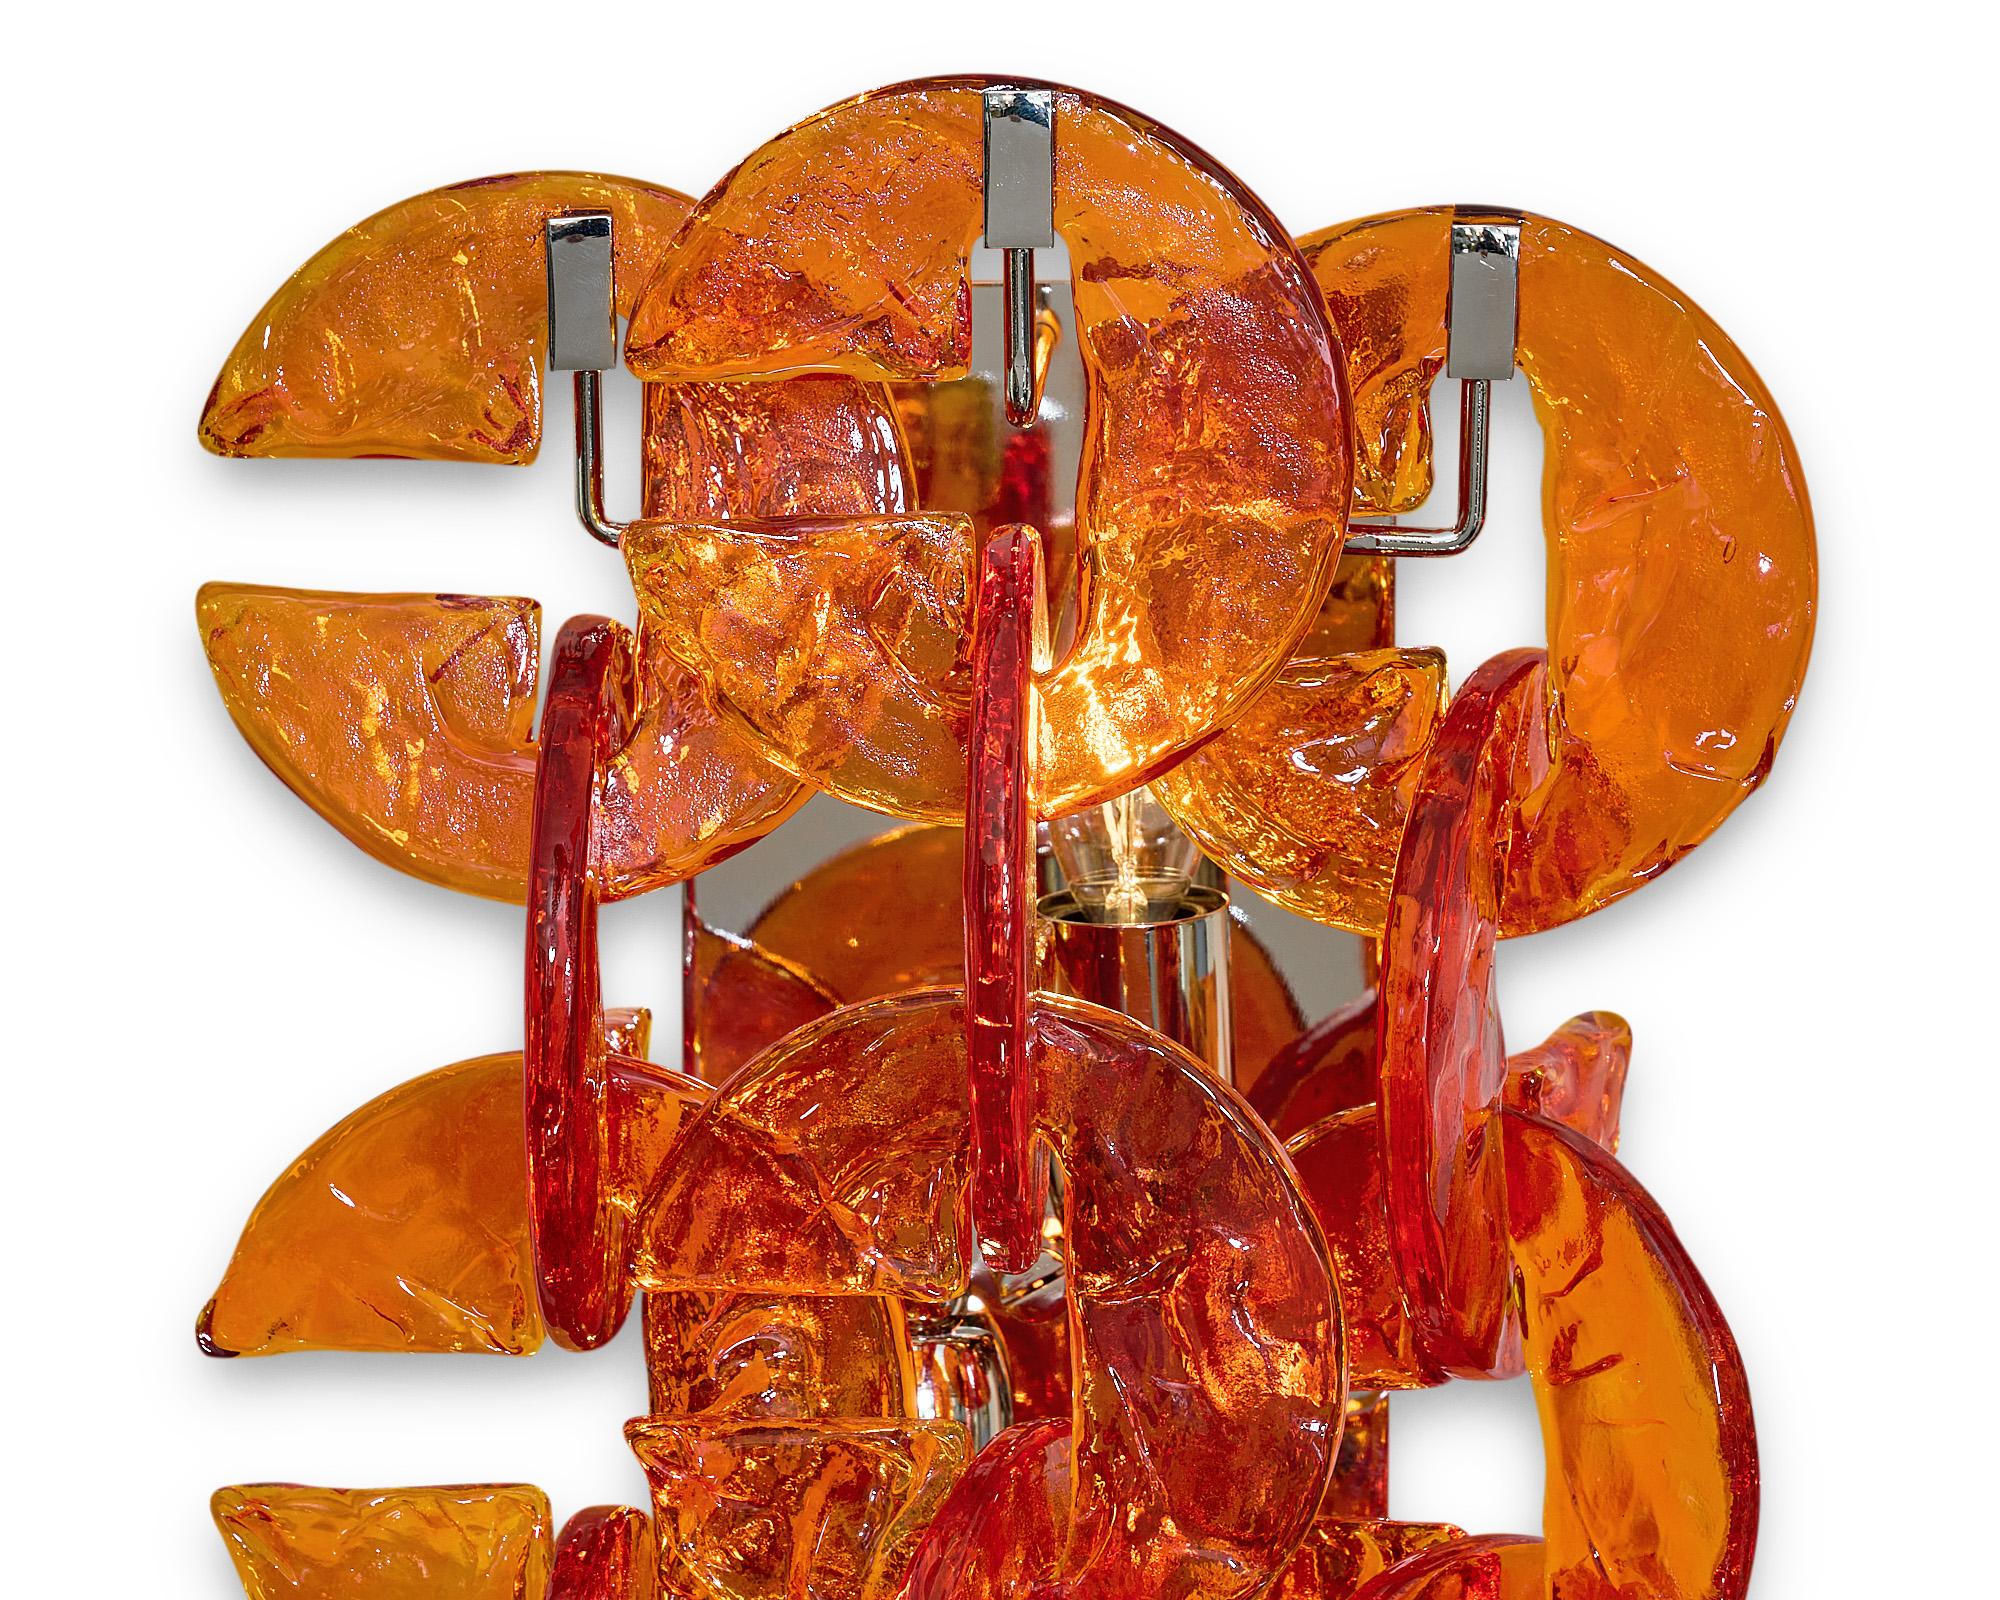 Pair of Murano glass sconces from the island of Murano, Italy. The sconces feature multiple C shaped orange hand-molded glass components in the “ferro Battuto” fashion. They sit on a chromed steel structure. This pair has been newly wired to fit US